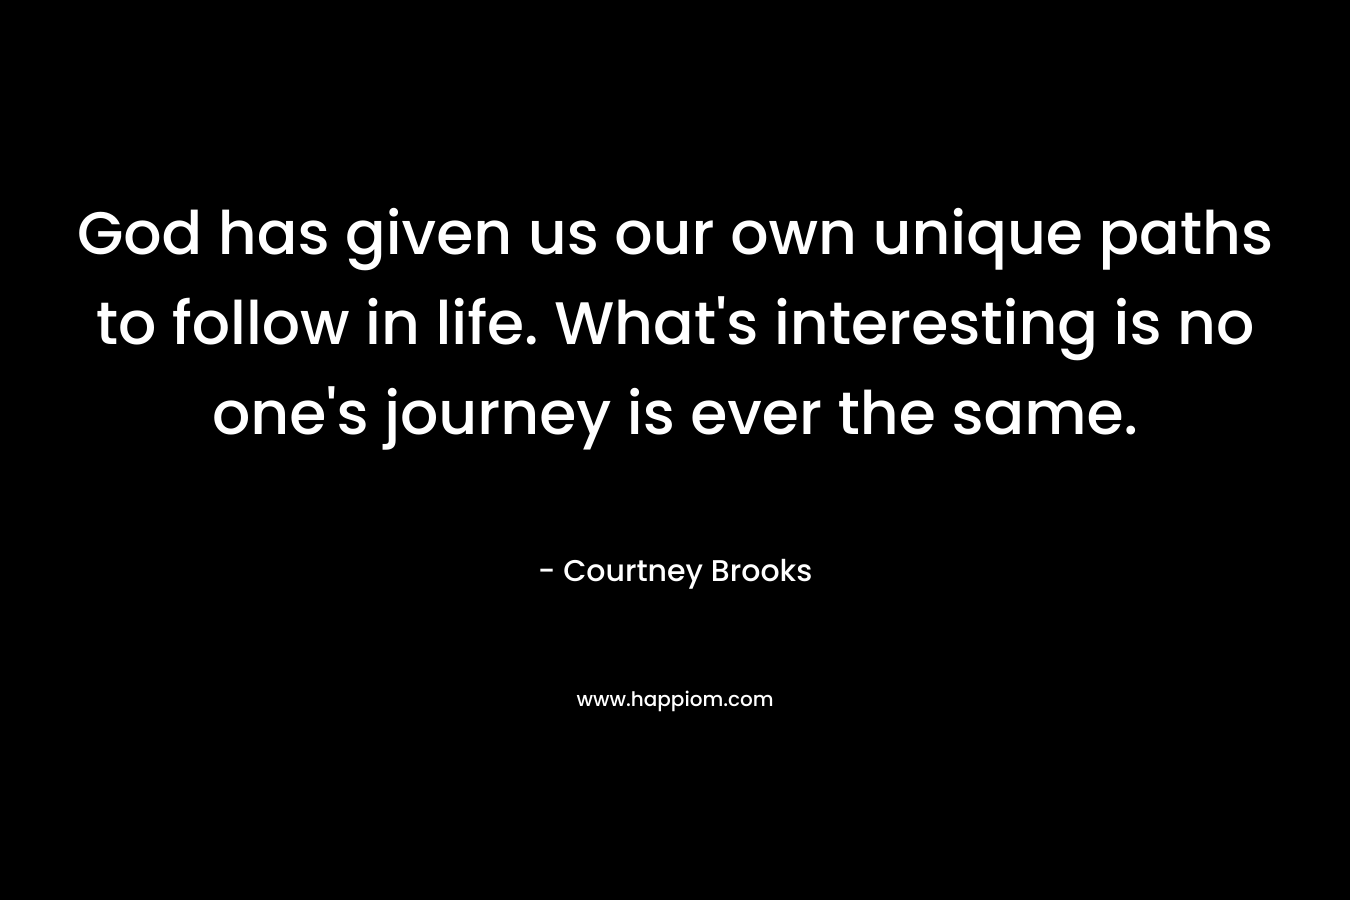 God has given us our own unique paths to follow in life. What’s interesting is no one’s journey is ever the same. – Courtney Brooks